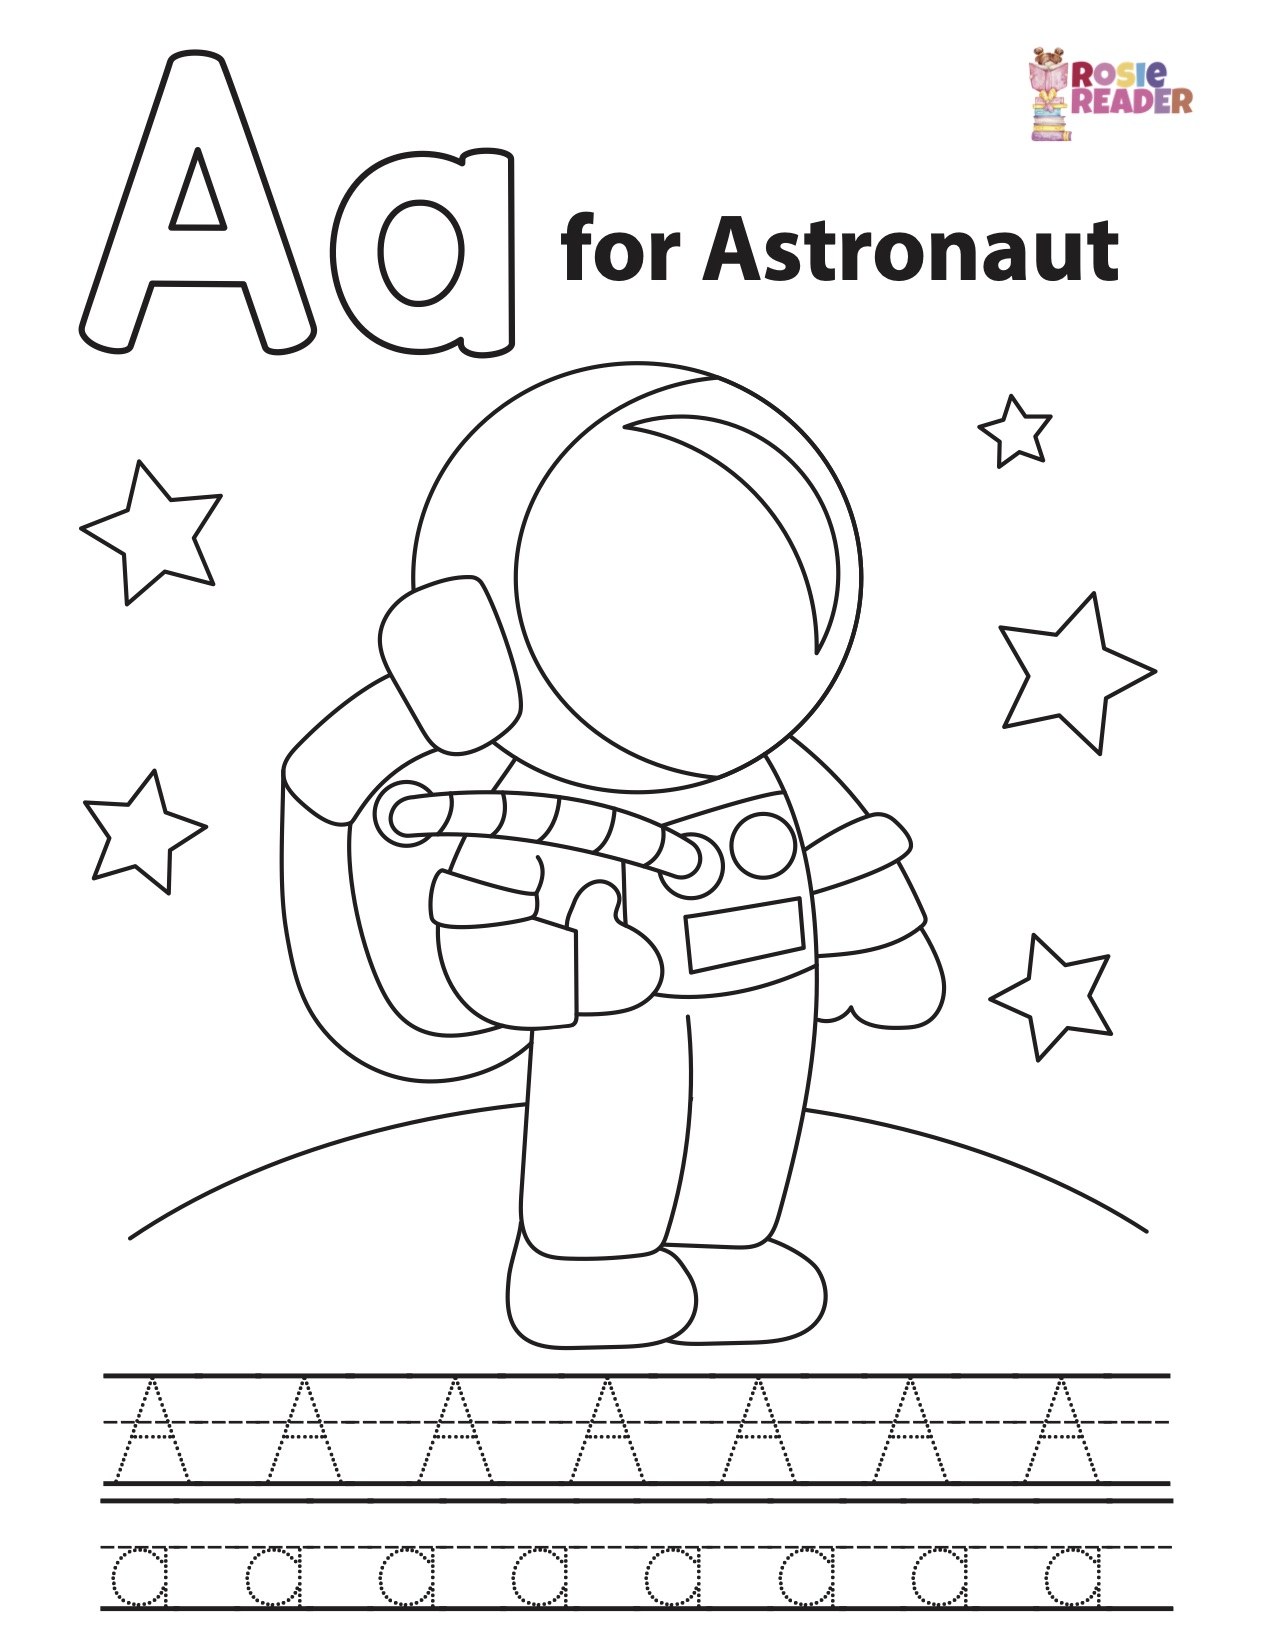 order-of-the-planets-worksheet